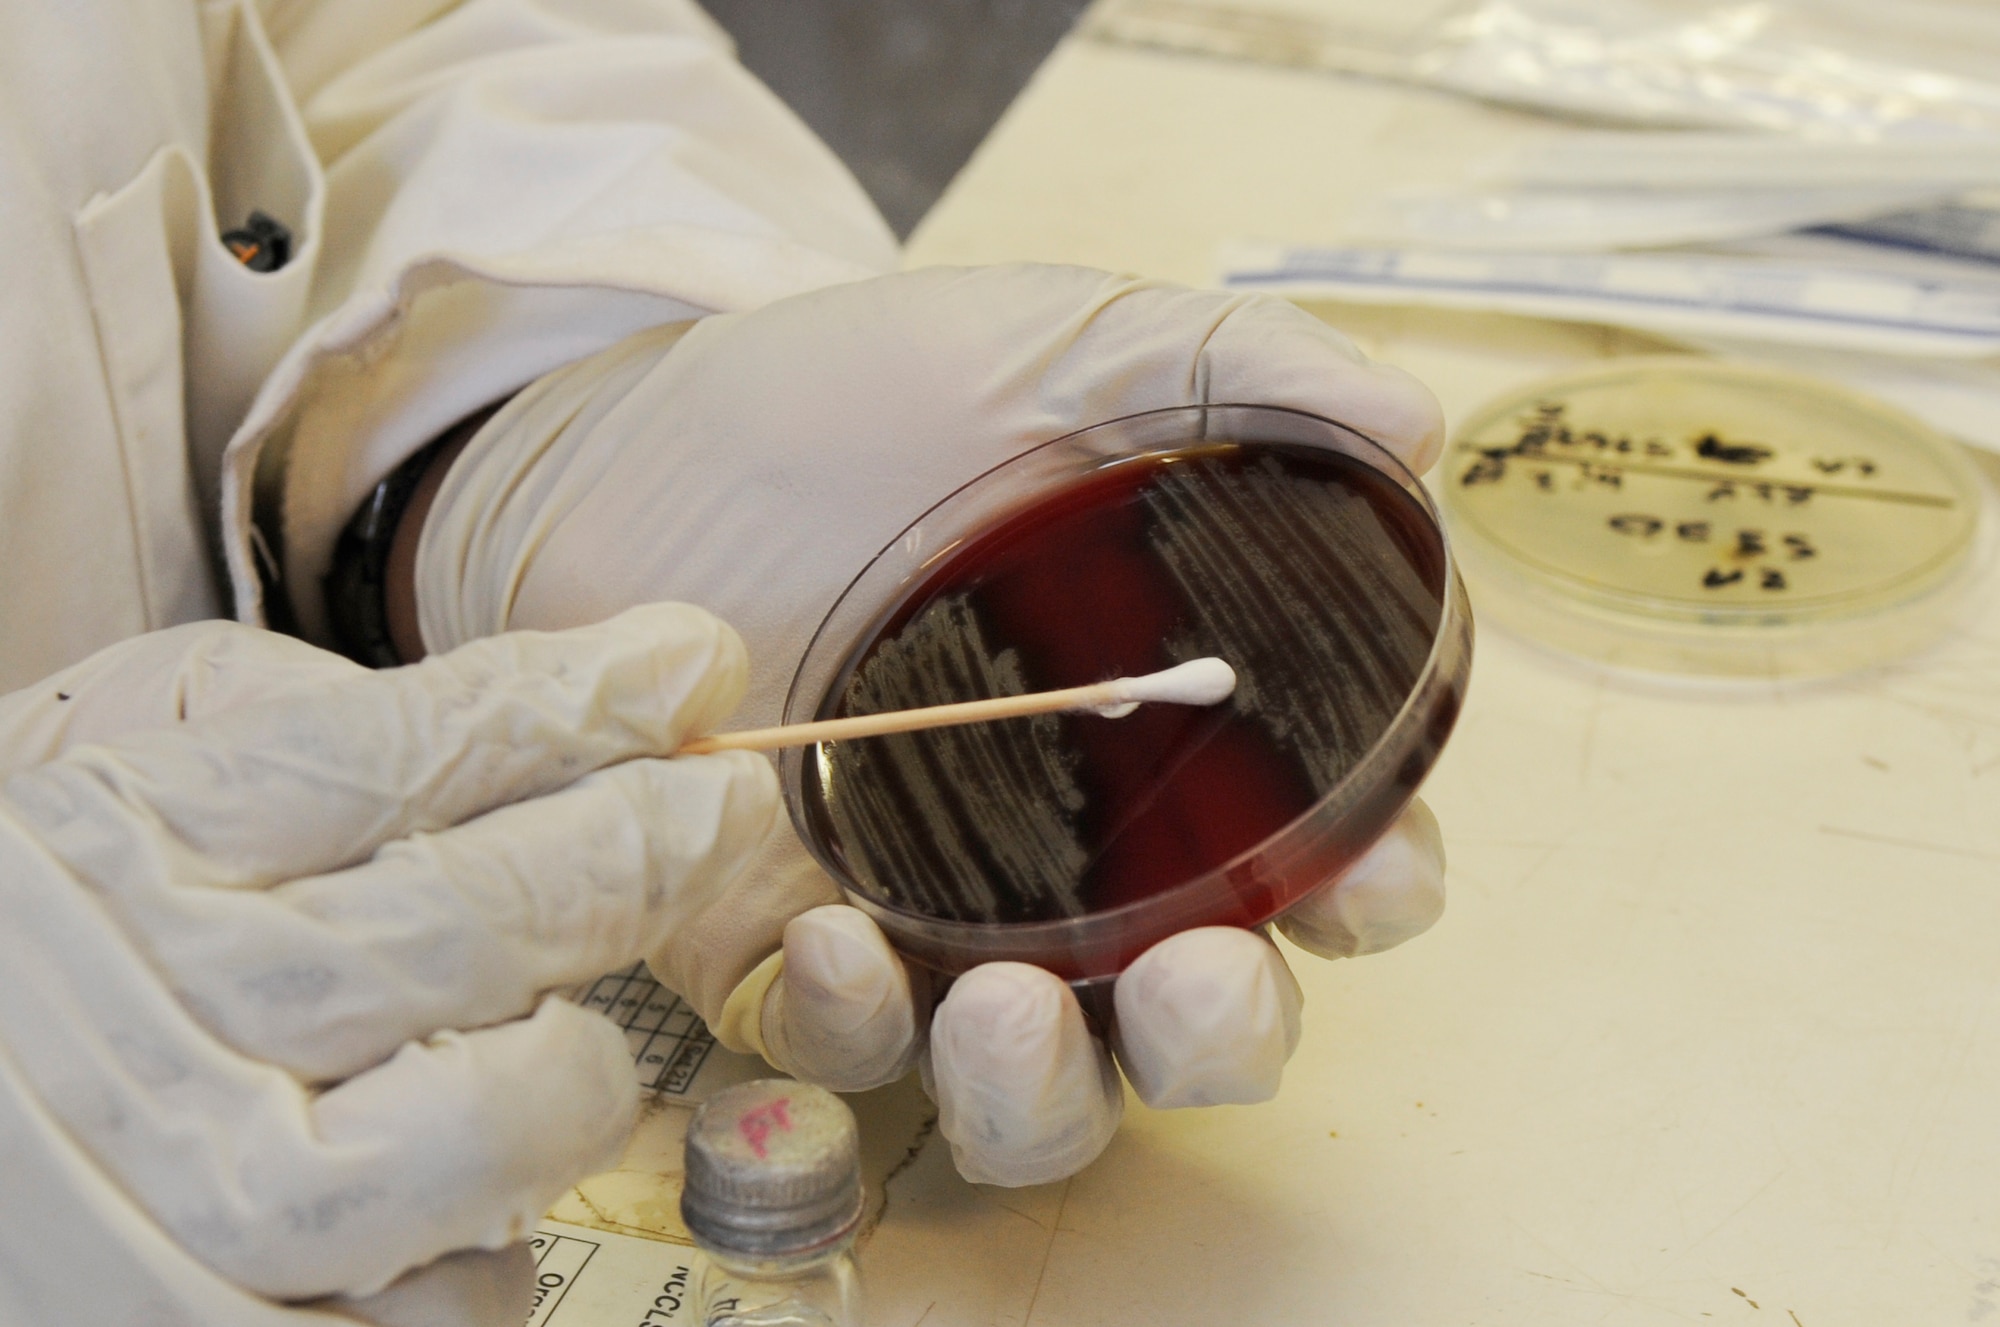 A bacteriology researcher at the Institute of Medical Research swabs an isolated sample of streptococcus pneumonia in Goroka, Papua New Guinea, June 4, 2015. The researcher is testing the bacteria to determine if the strain has sensitivity to antibiotics or if it is resistant. Efforts undertaken during Pacific Angel help multilateral militaries in the Pacific improve and build relationships across a wide spectrum of civic operations, which bolsters each nation???s capacity to respond and support future humanitarian assistance and disaster relief operations. (U.S. Air Force photo by Staff Sgt. Marcus Morris/Released)